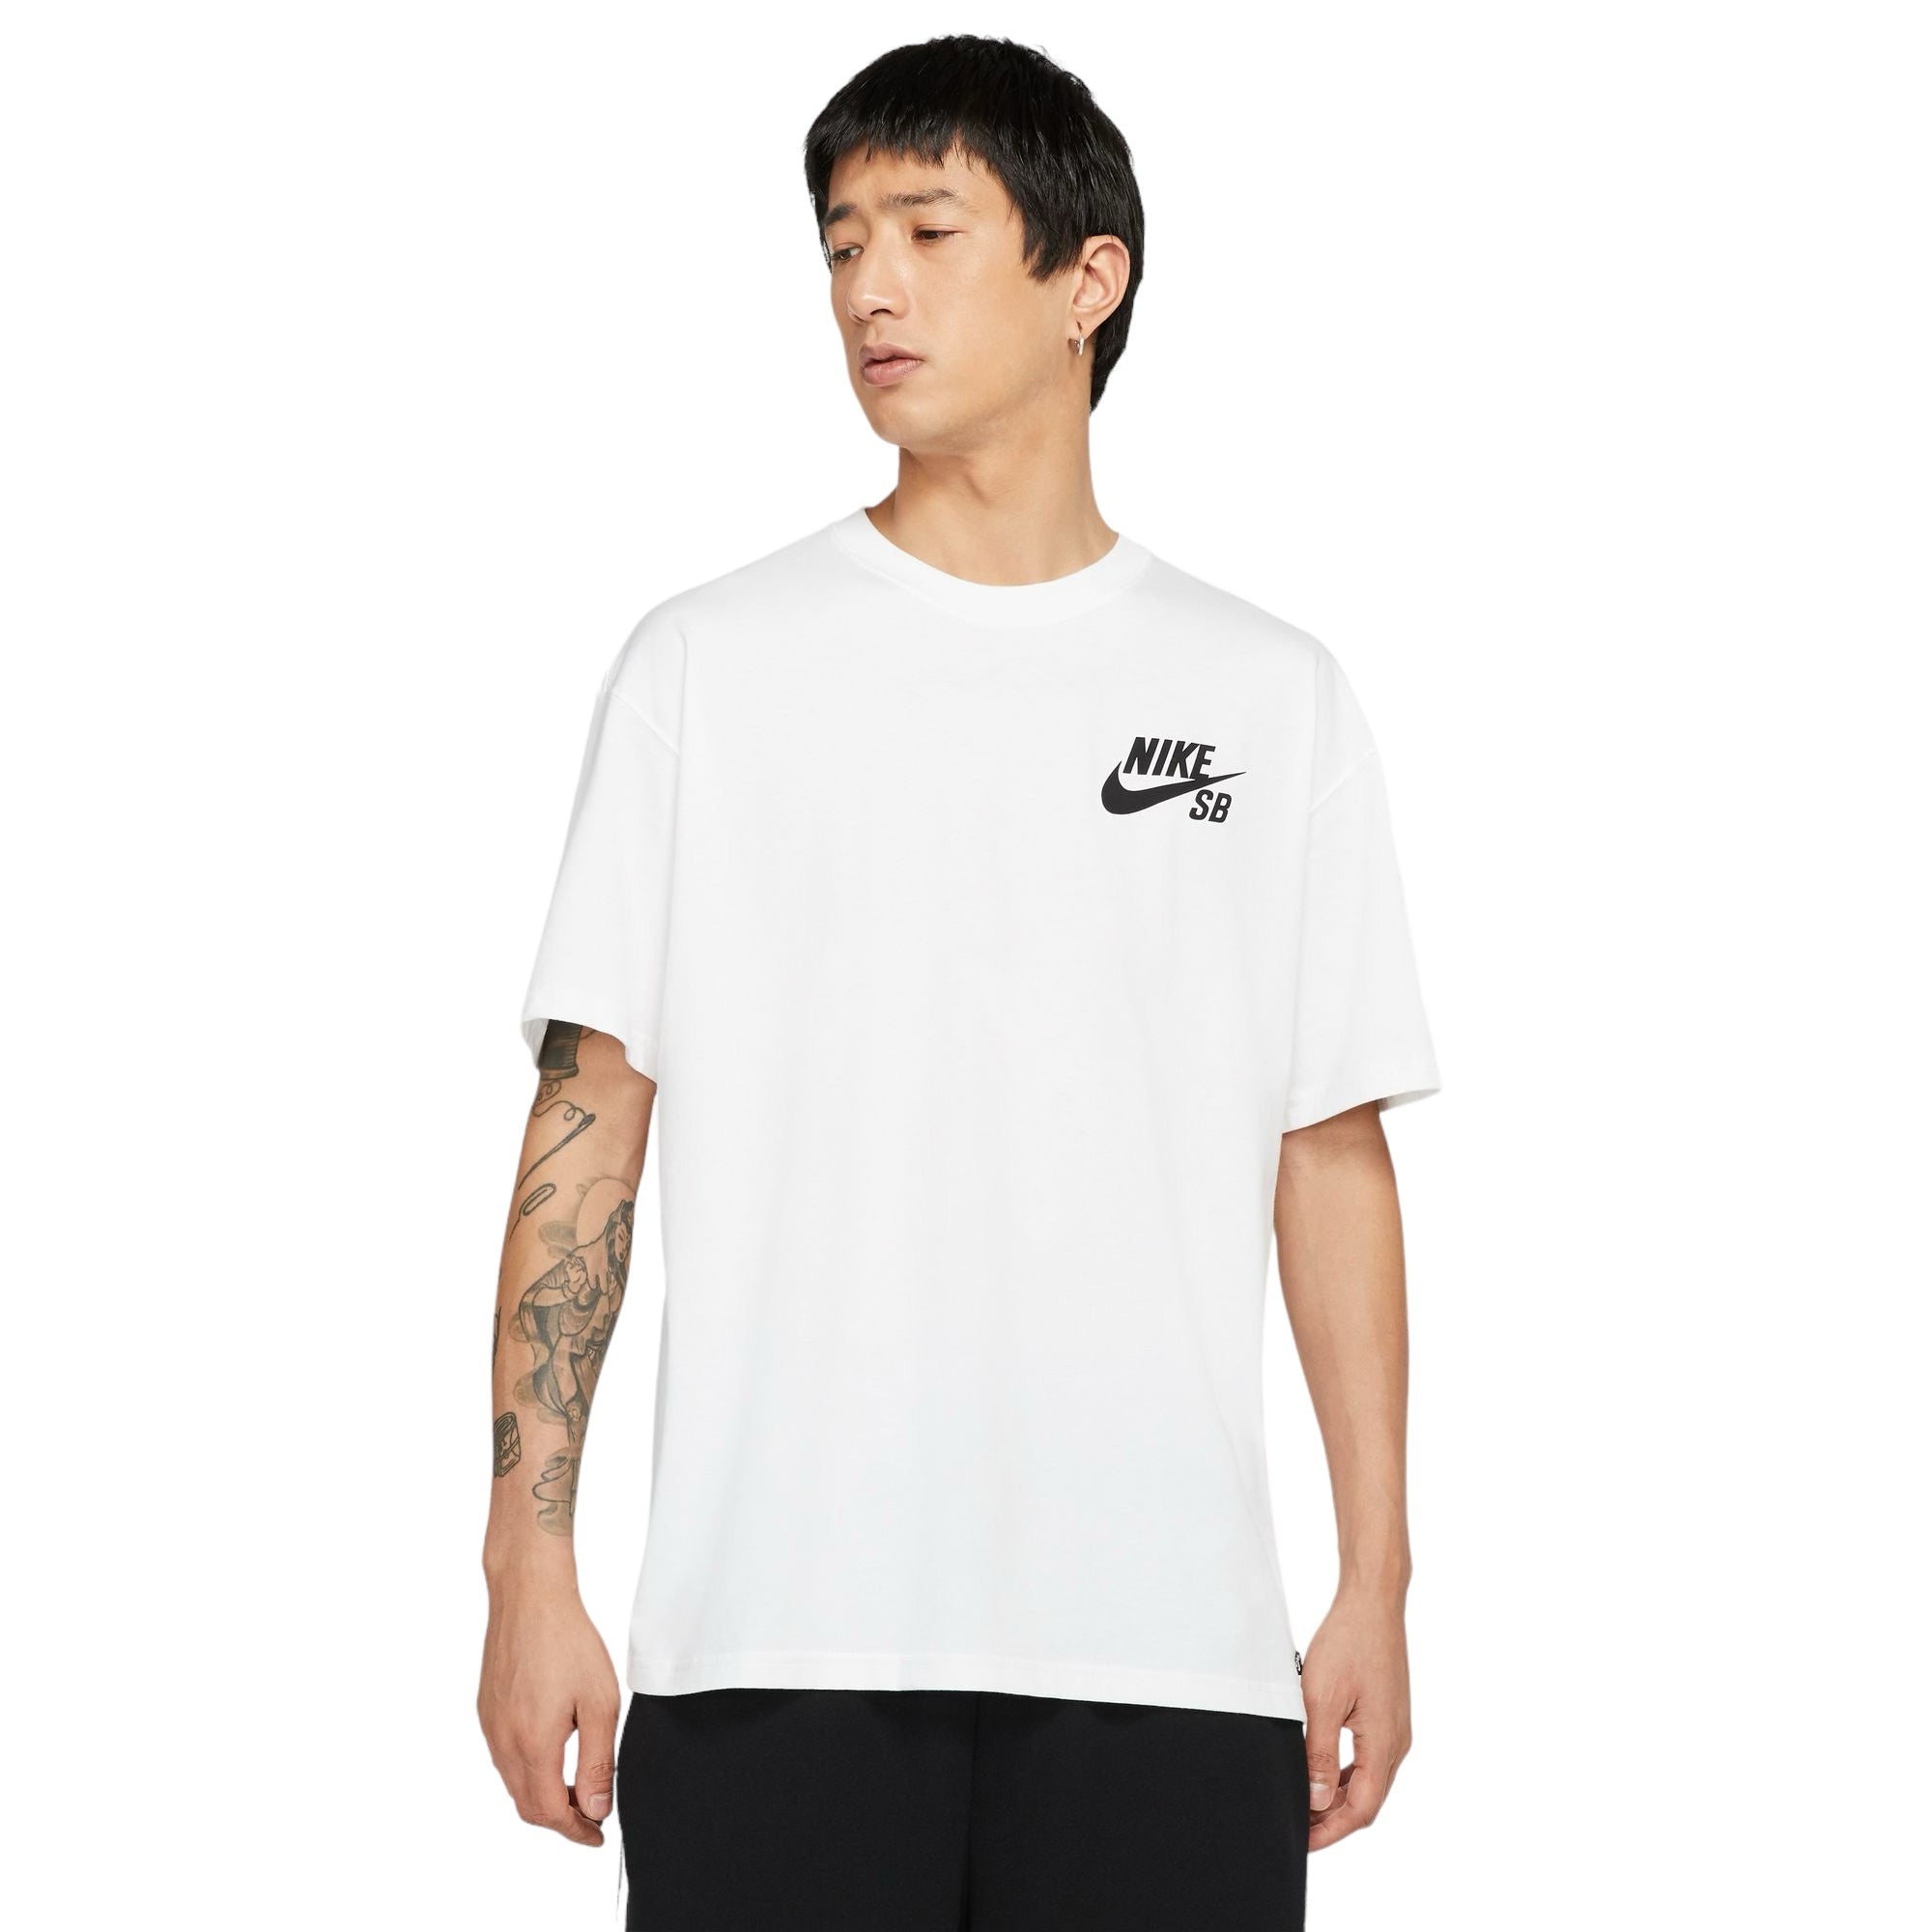 White nike short sleeve t-shirt with black SB swoosh logo on front. Free uk shipping for orders over £50